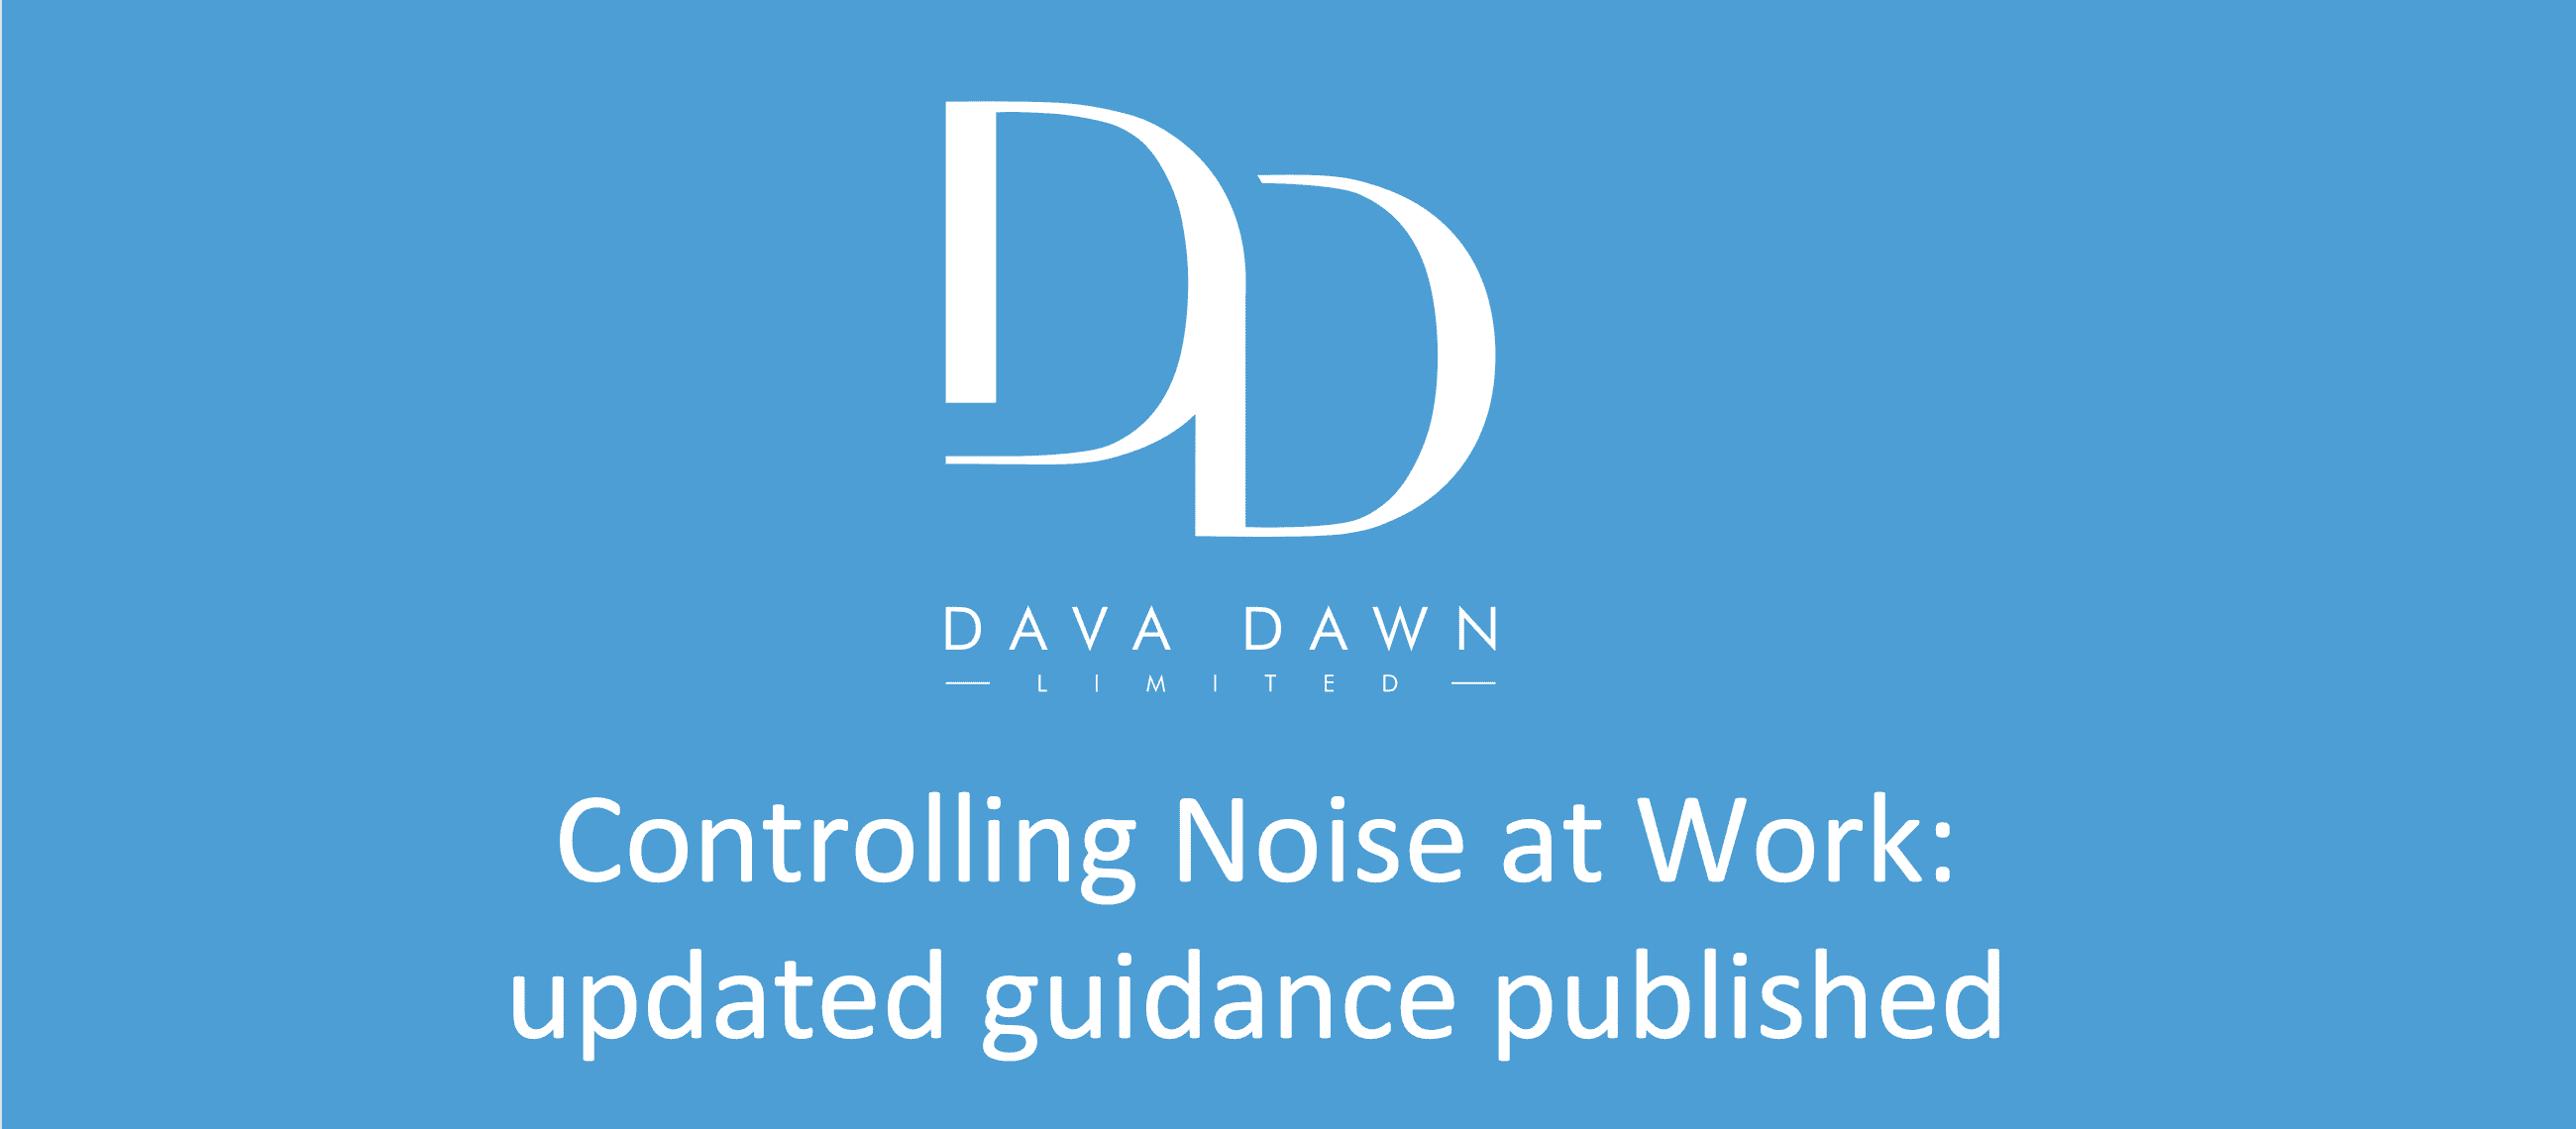 Controlling Noise at Work: updated guidance published